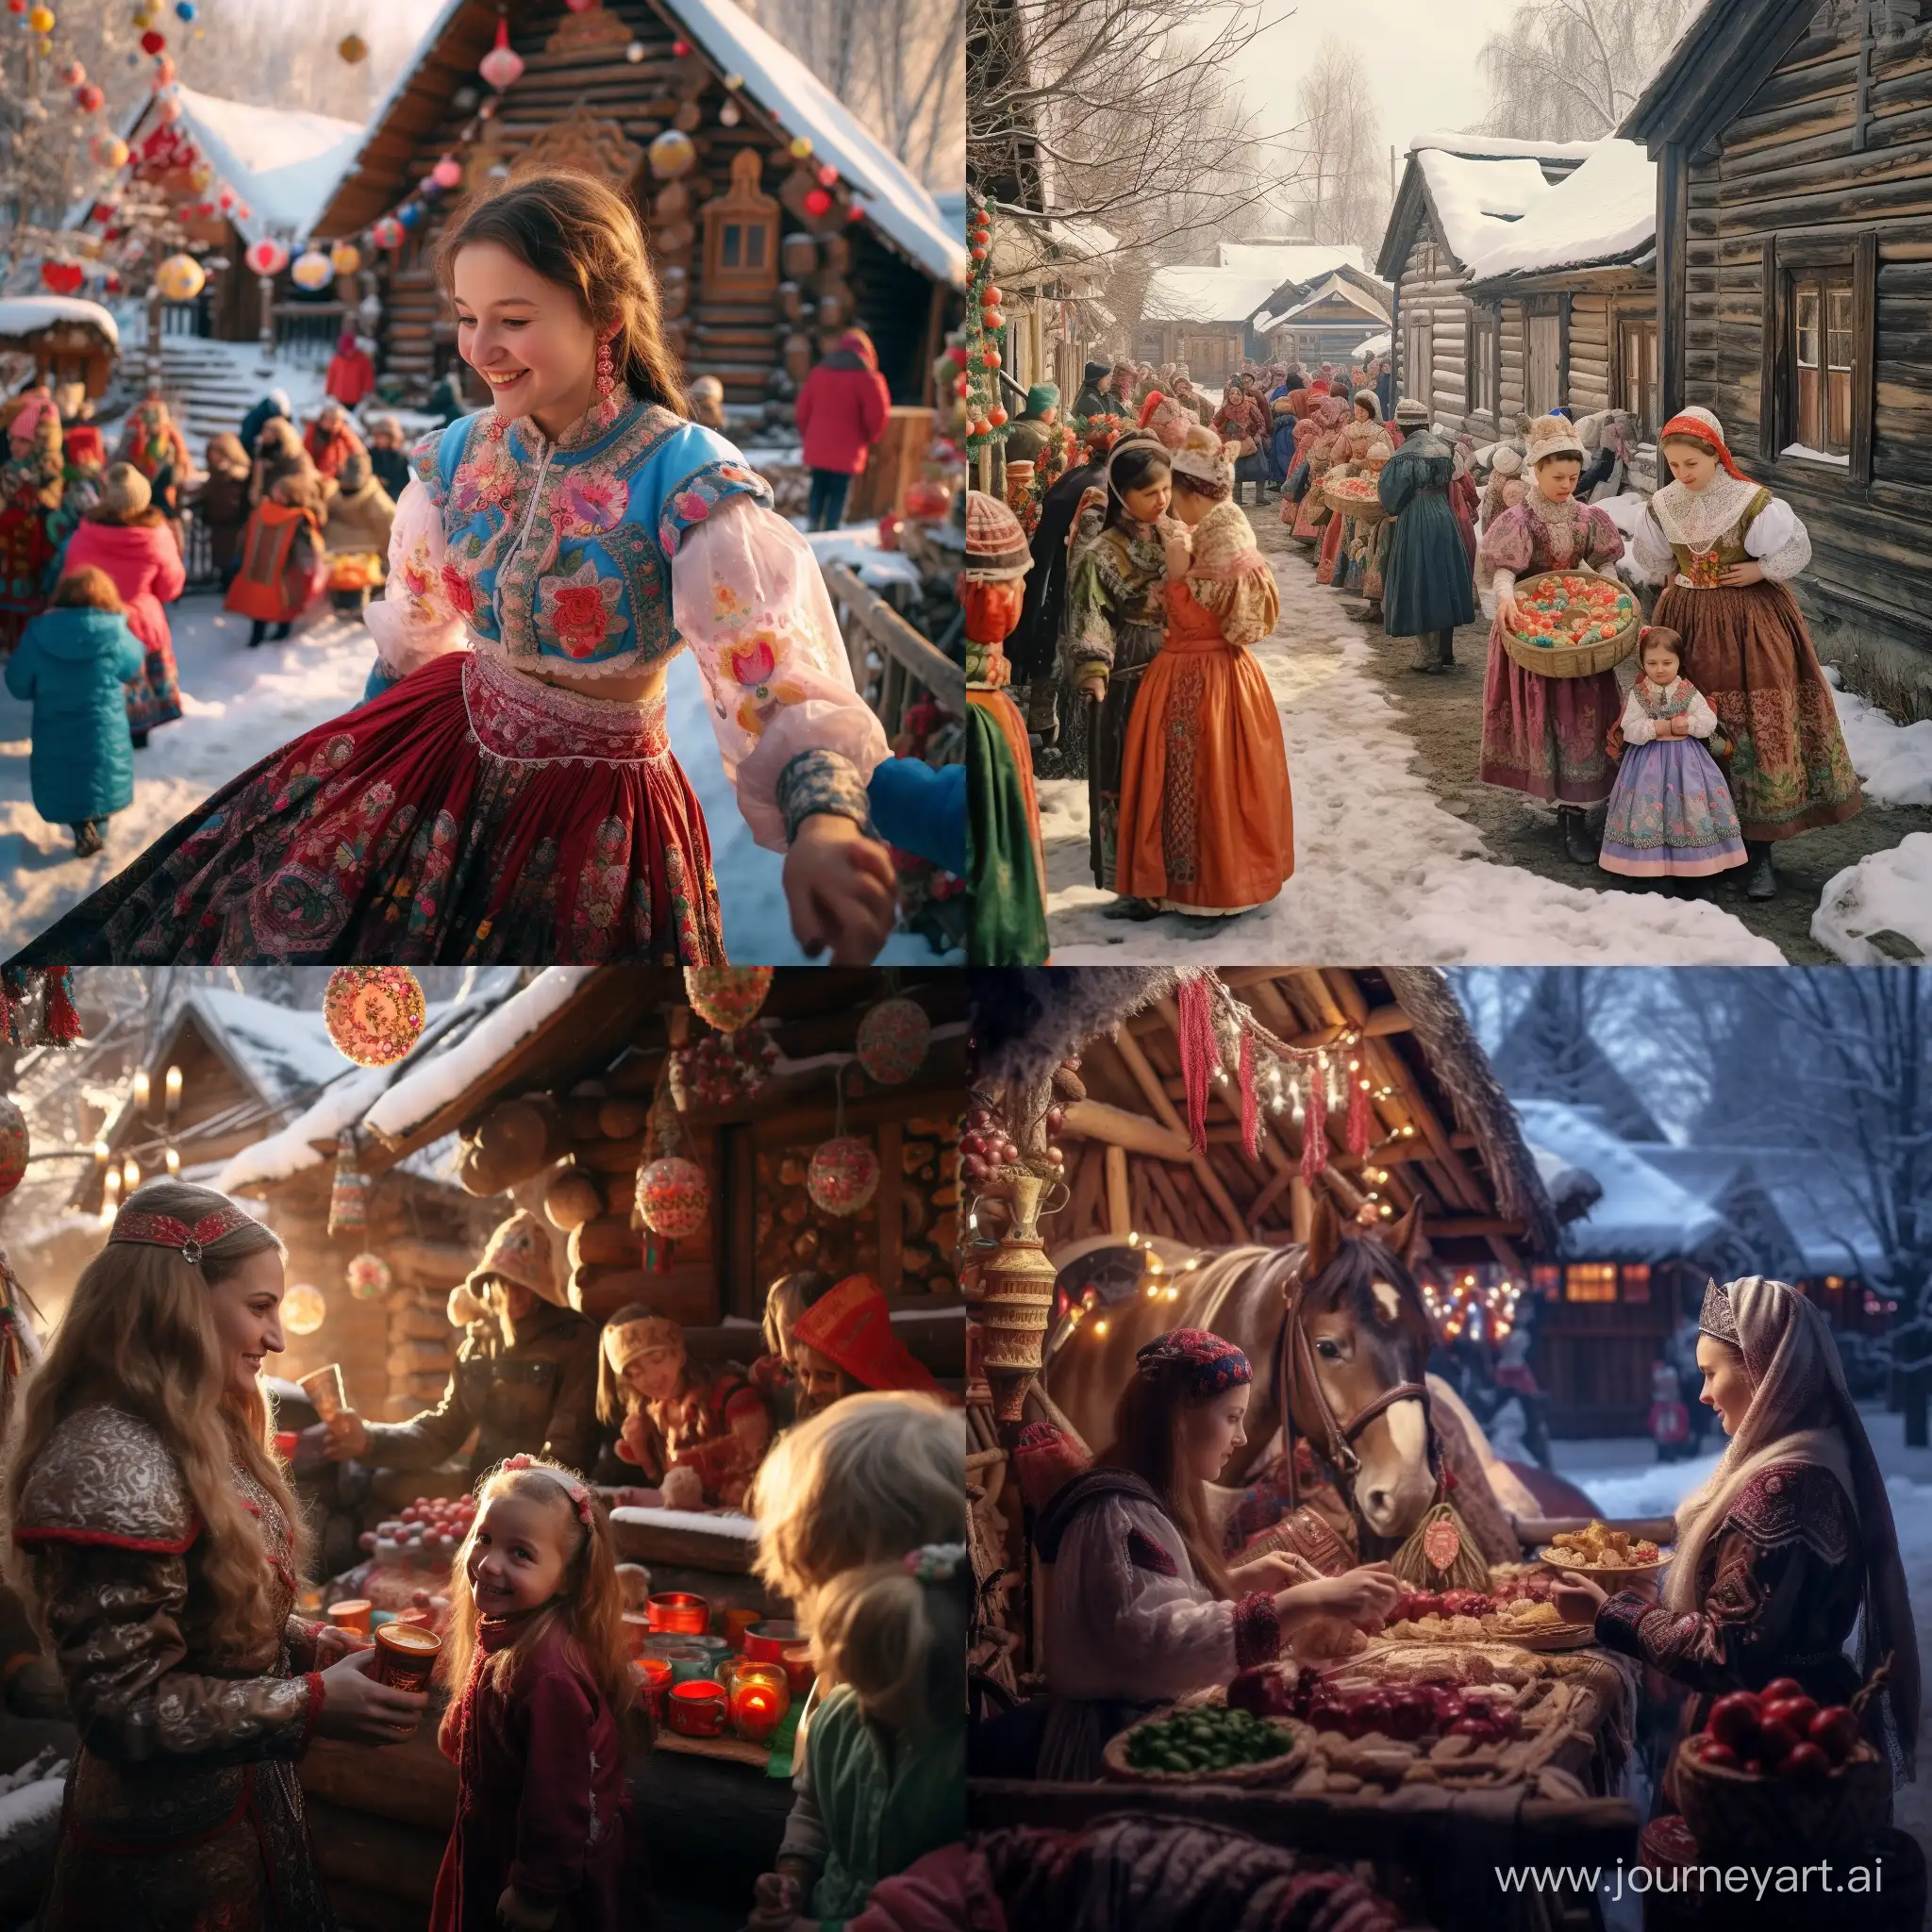 Festive-Christmas-Celebration-in-a-Russian-Village-Hyperrealistic-Photography